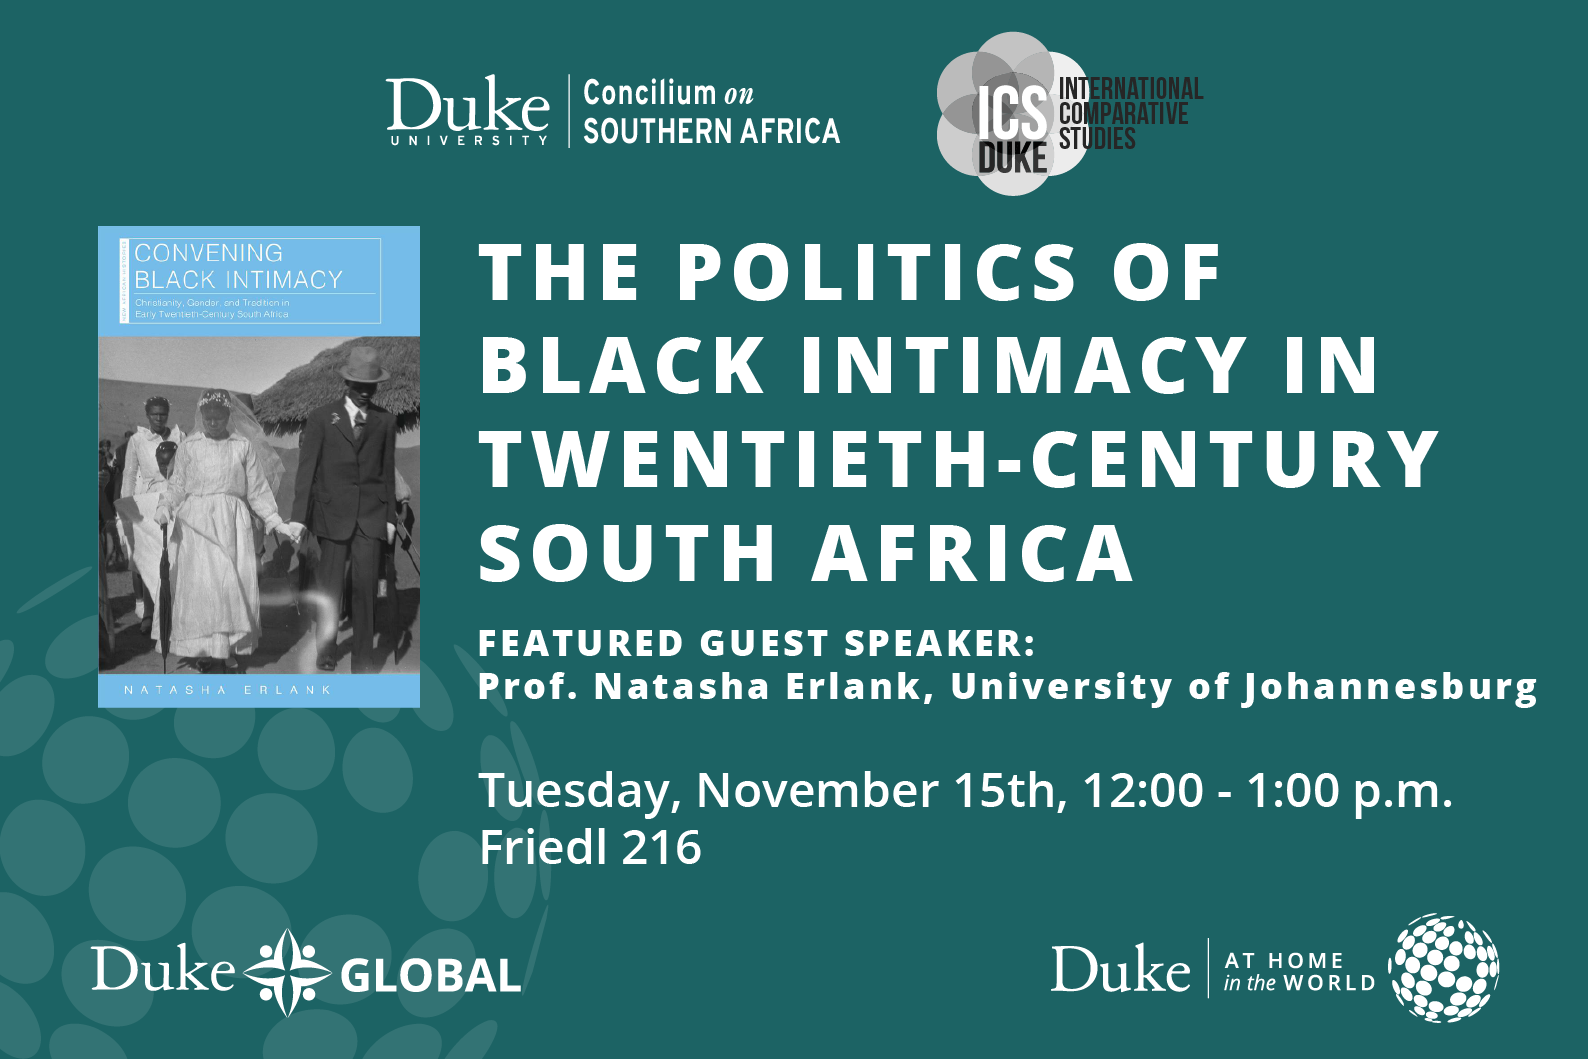 The Politics of Black Intimacy in Twentieth-Century South Africa, Tuesday, November 15th, 12:00 - 1:00 p.m., Friedl 216